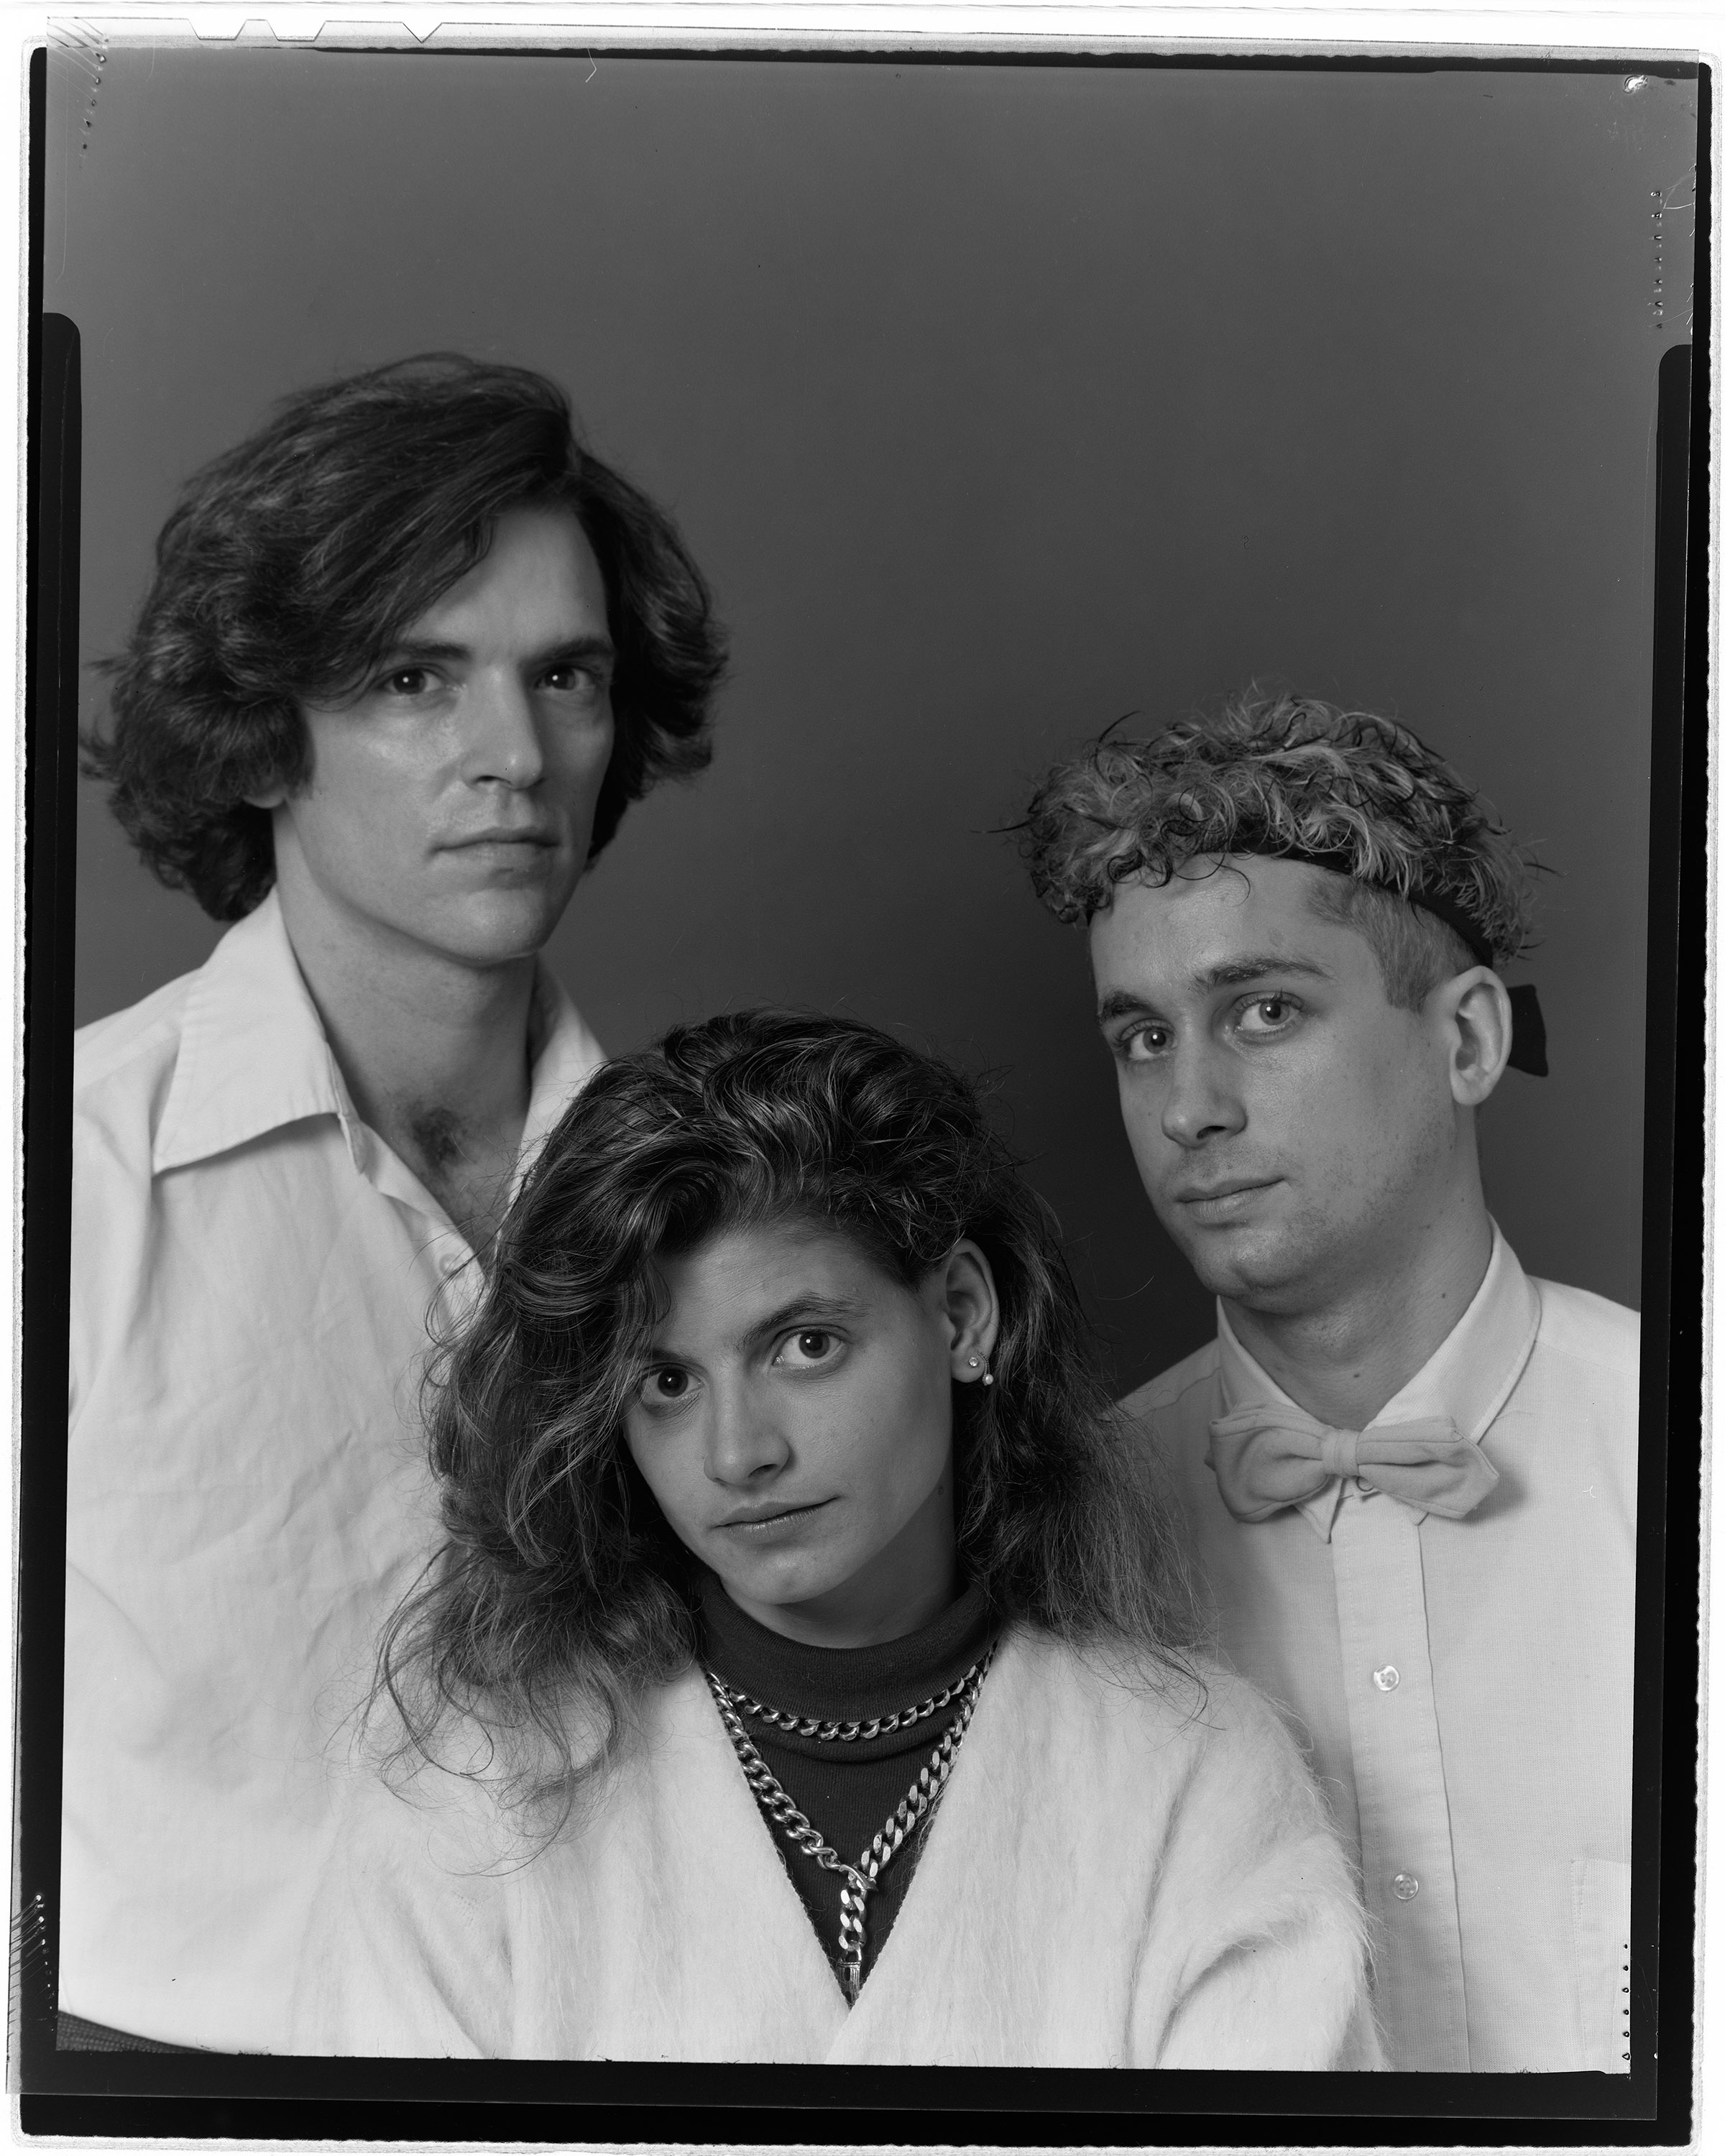 a black and white portrait of Michael Gormley, Jeannette Fanucci and Victor Mendolia of Limbo by tom warren